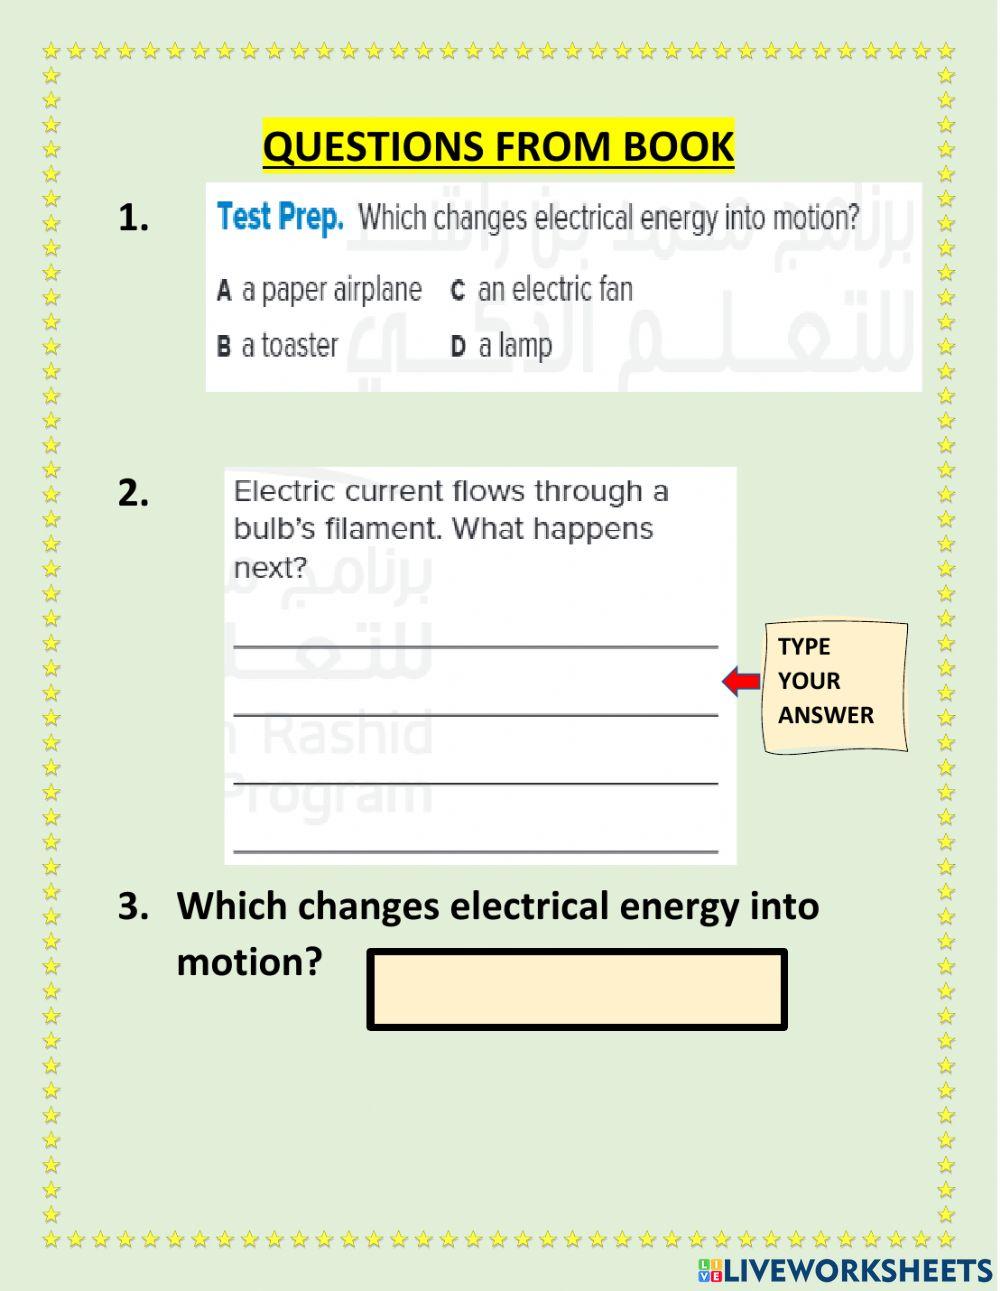 Chapter 6 lesson 5 Using electrical energy